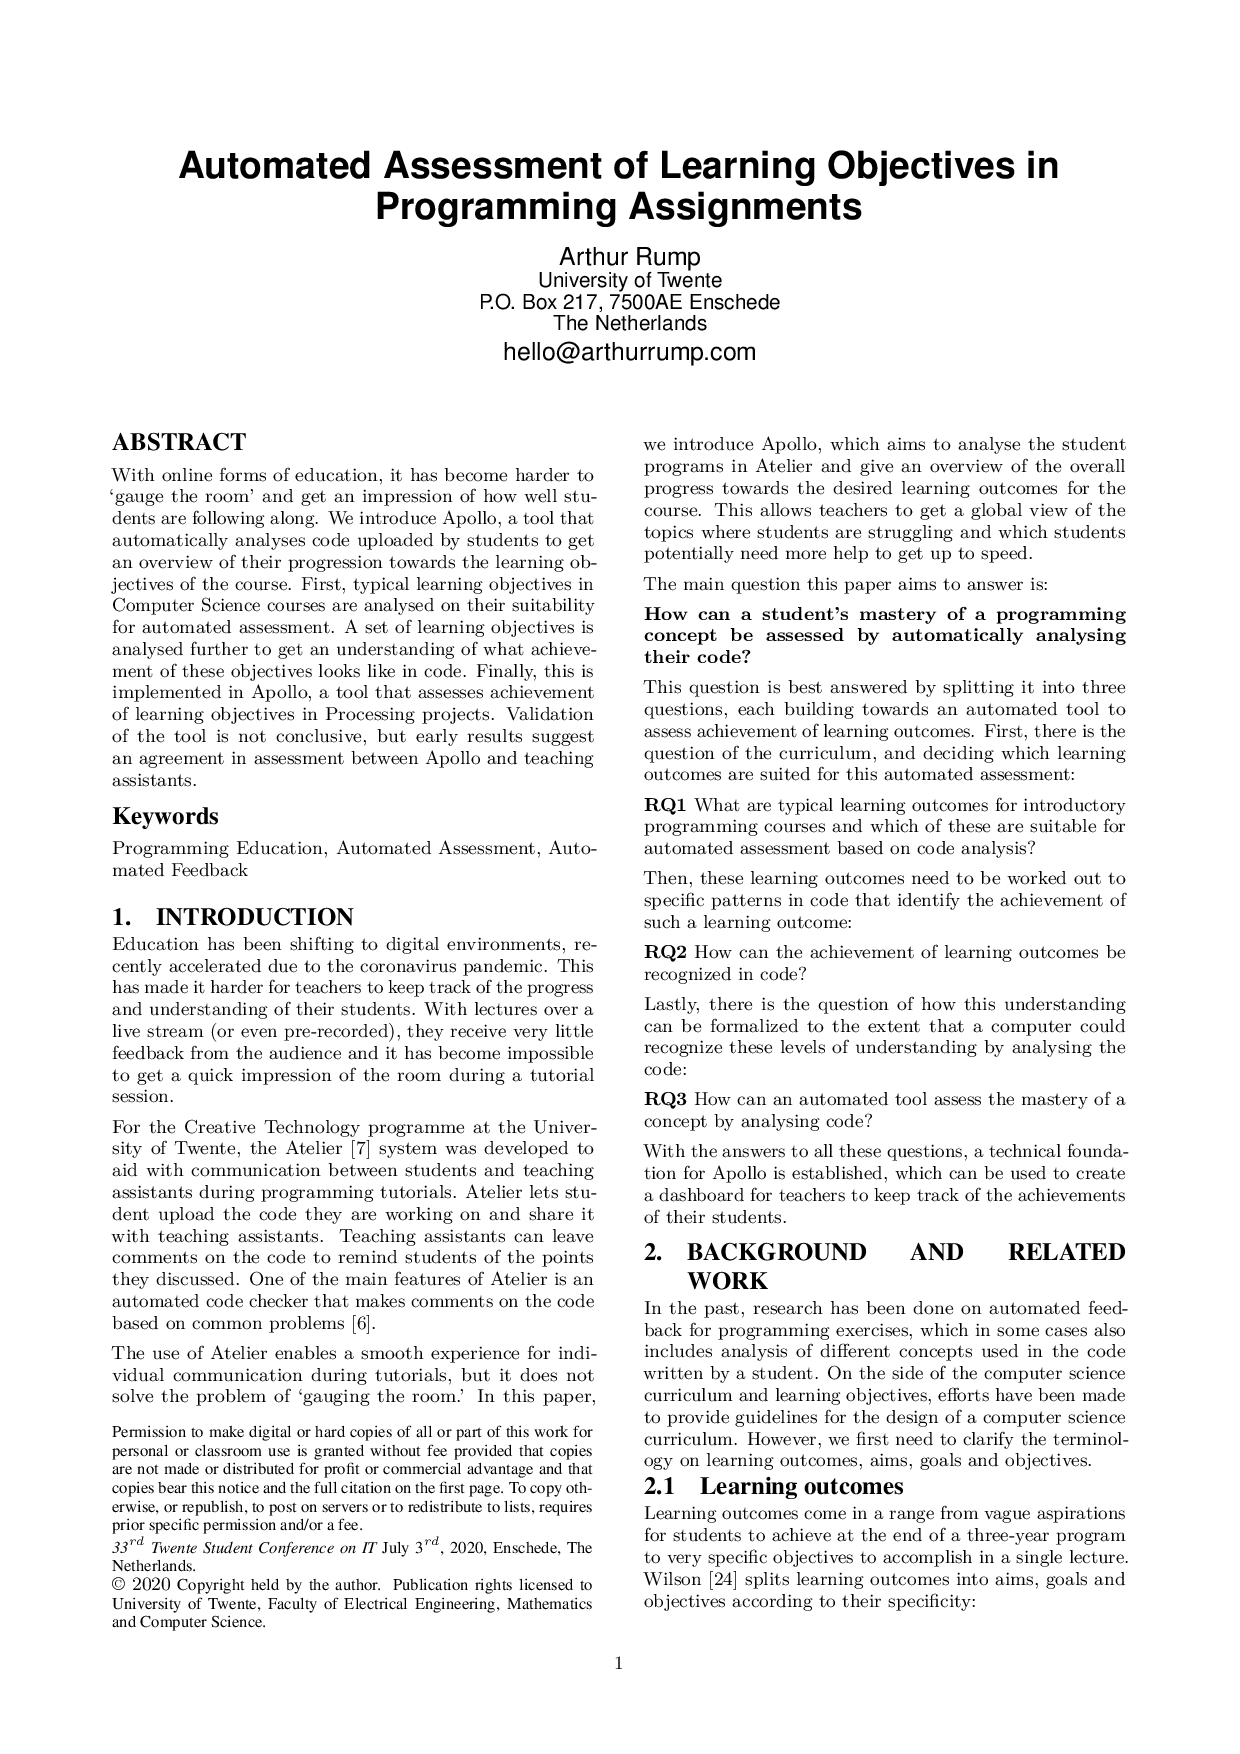 Poster, Automated Assessment of Learning Objectives in Programming Assignments